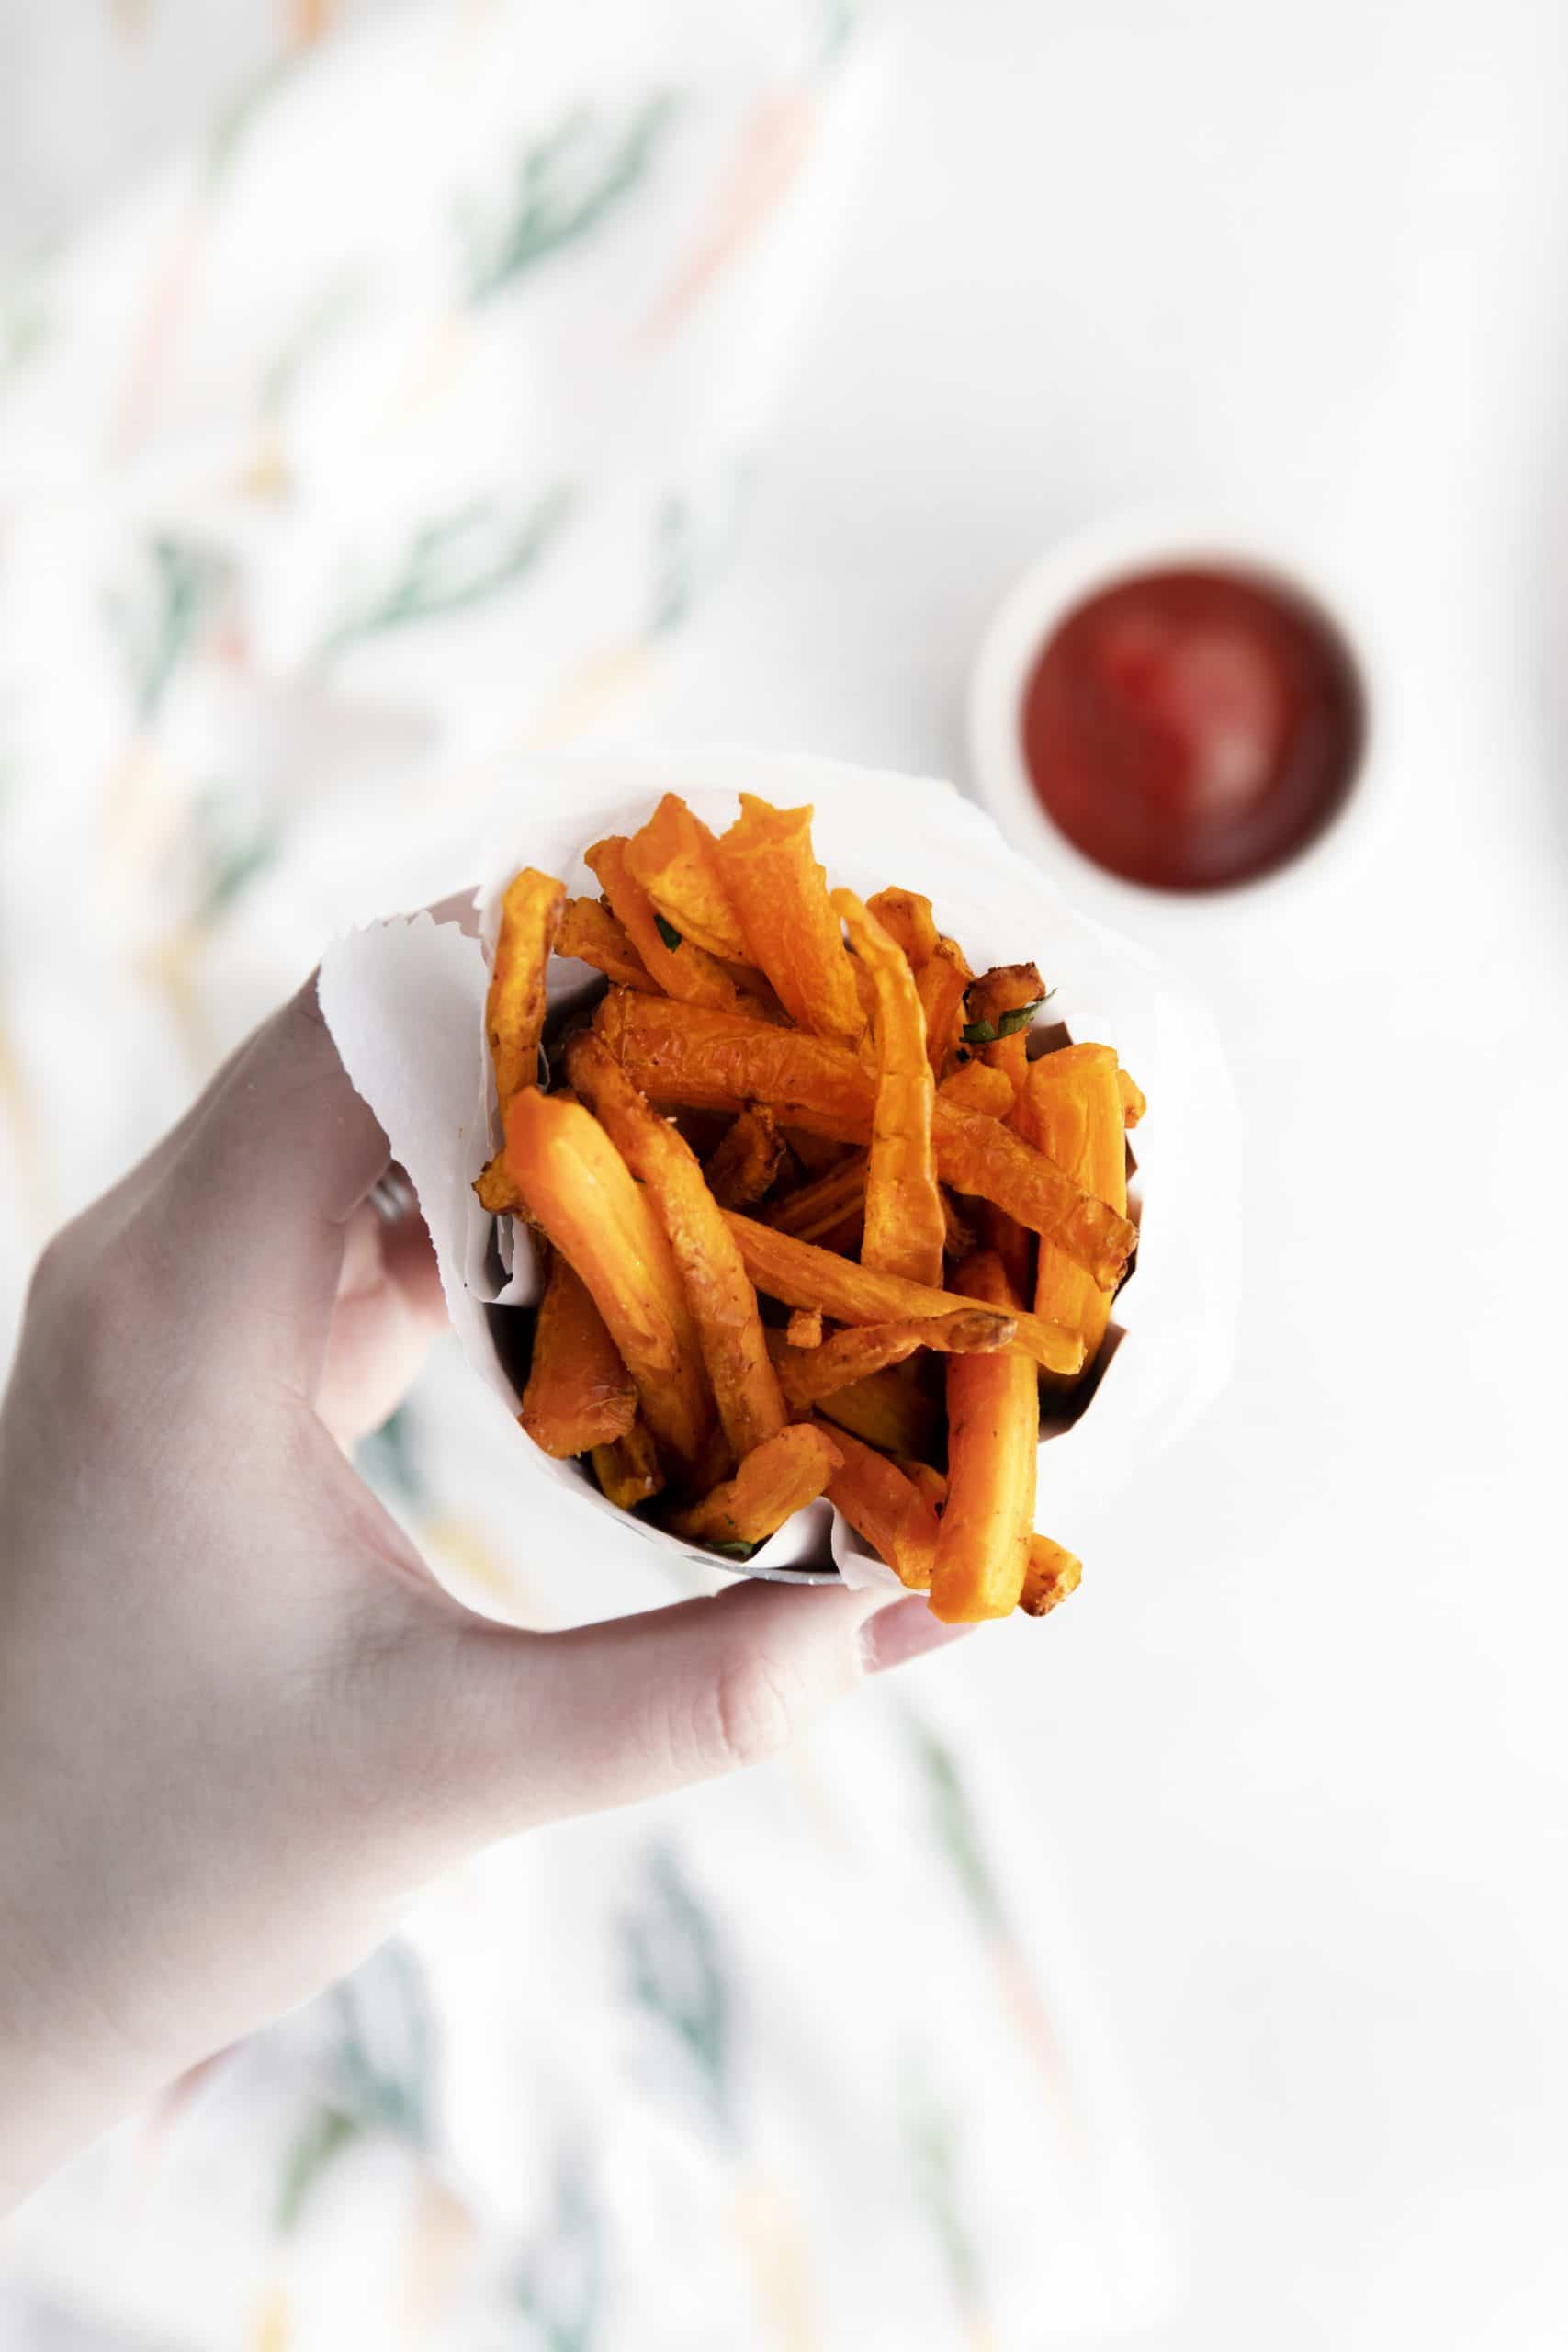 a hand holding a cup of air fryer carrot fries. A small cup of ketchup is visible in the background